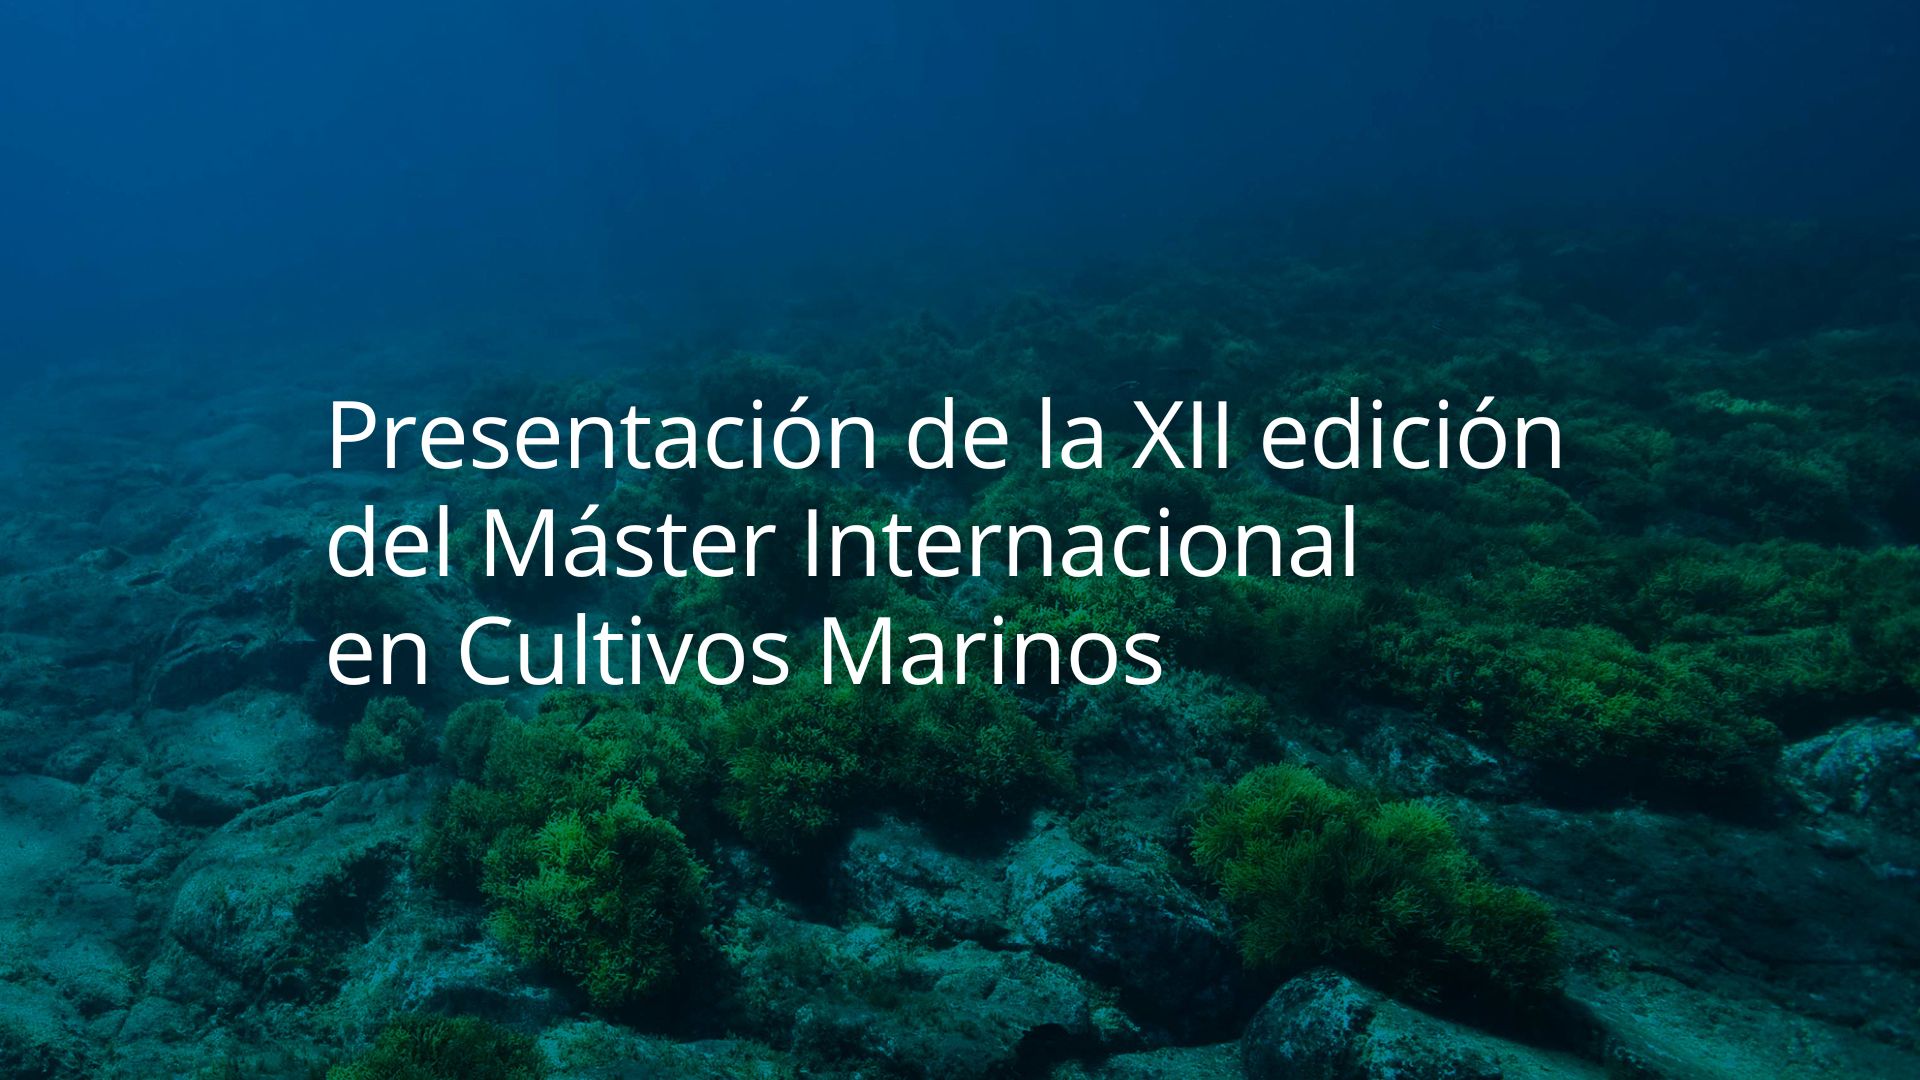 Presentation of the XII edition of the International Master's Degree in Marine Cultures